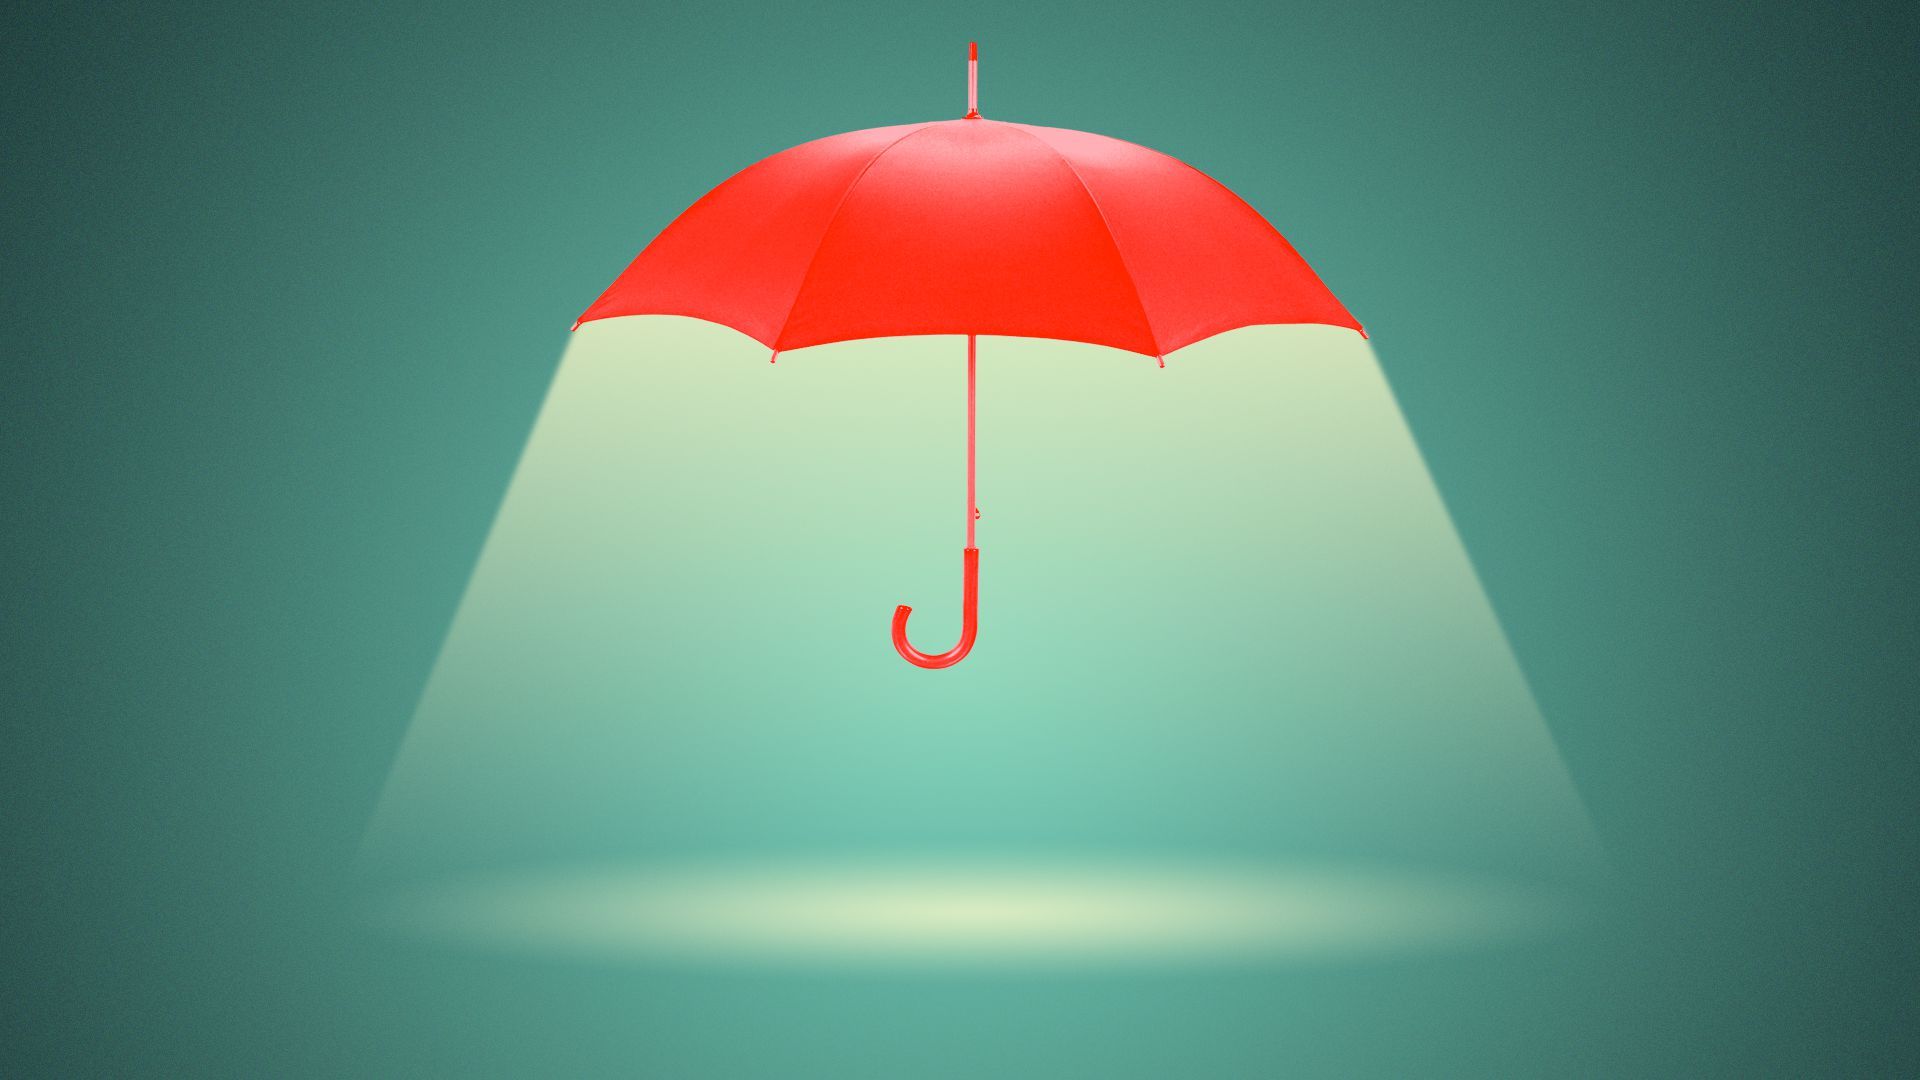 Illustration of an umbrella with light coming from underneath it.